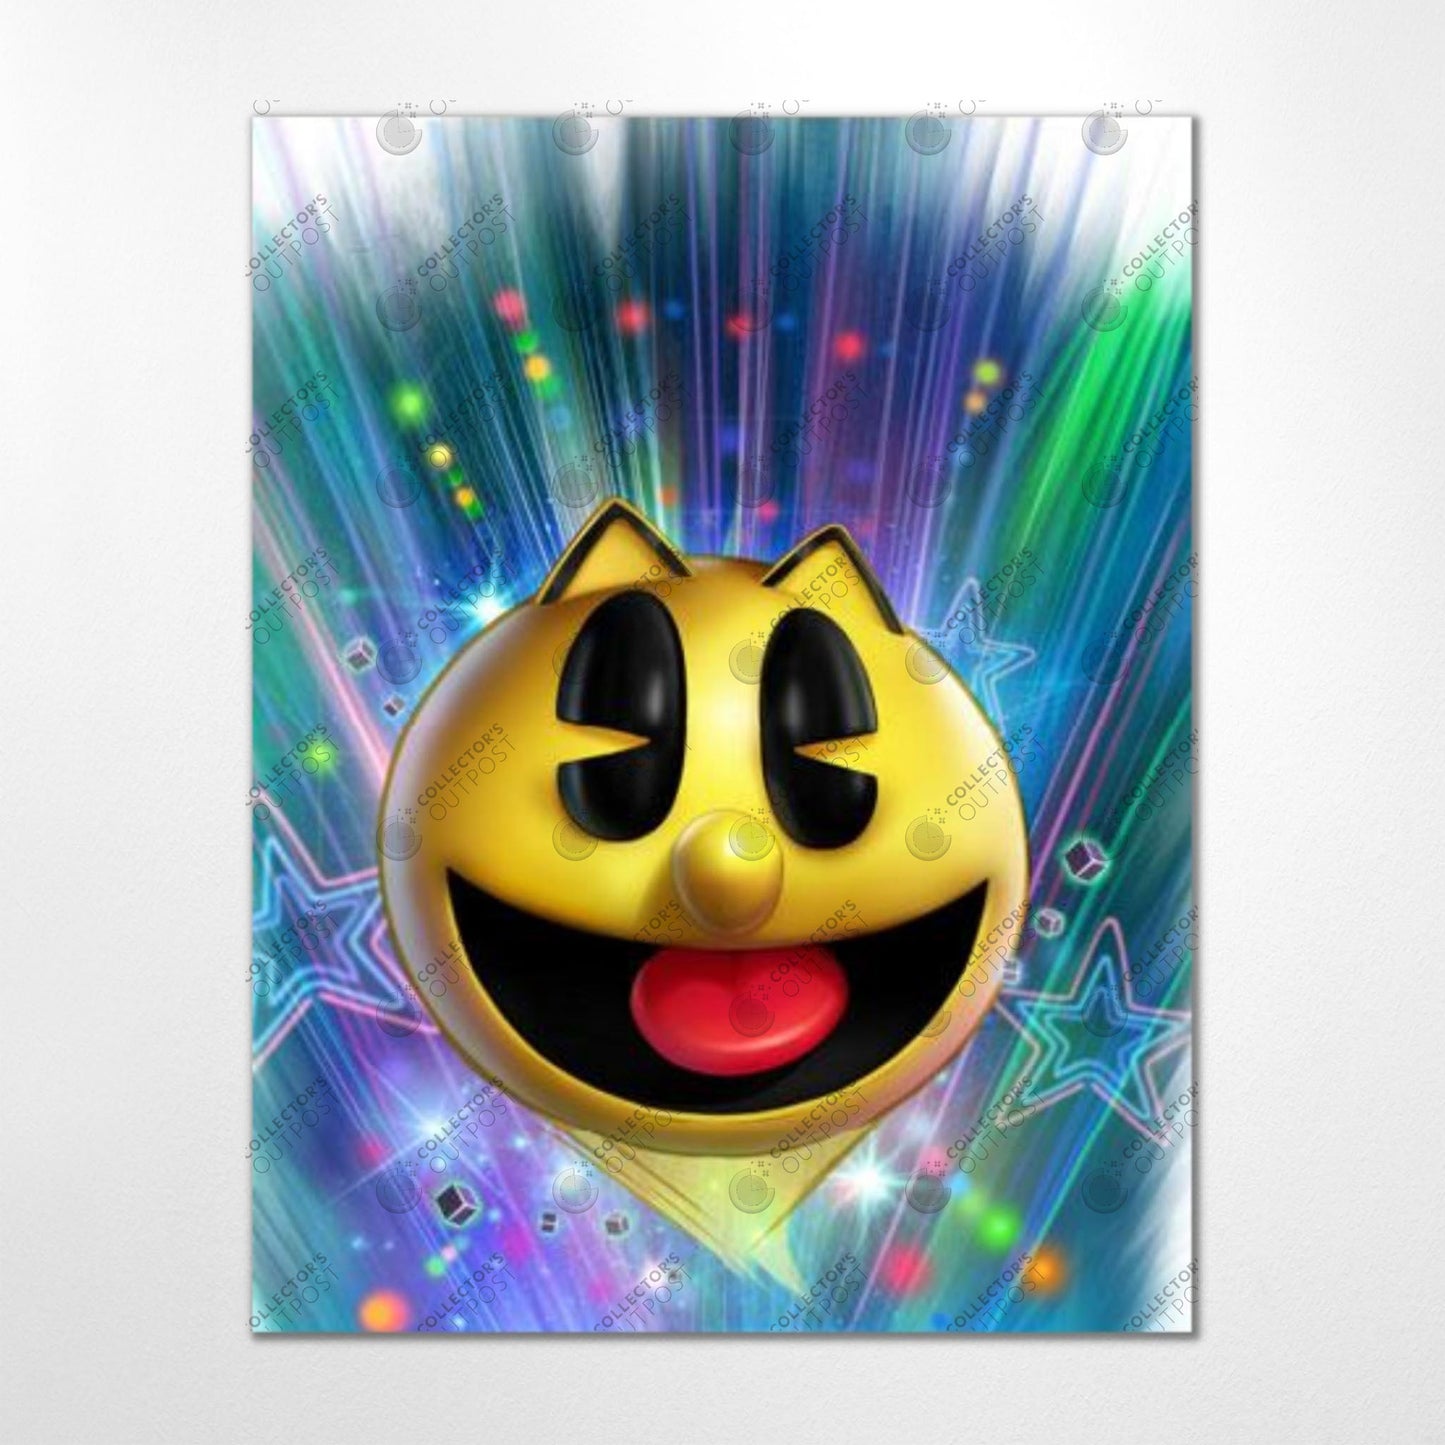 Pac-Man "The Ghost Eater" Legacy Portrait Art Print